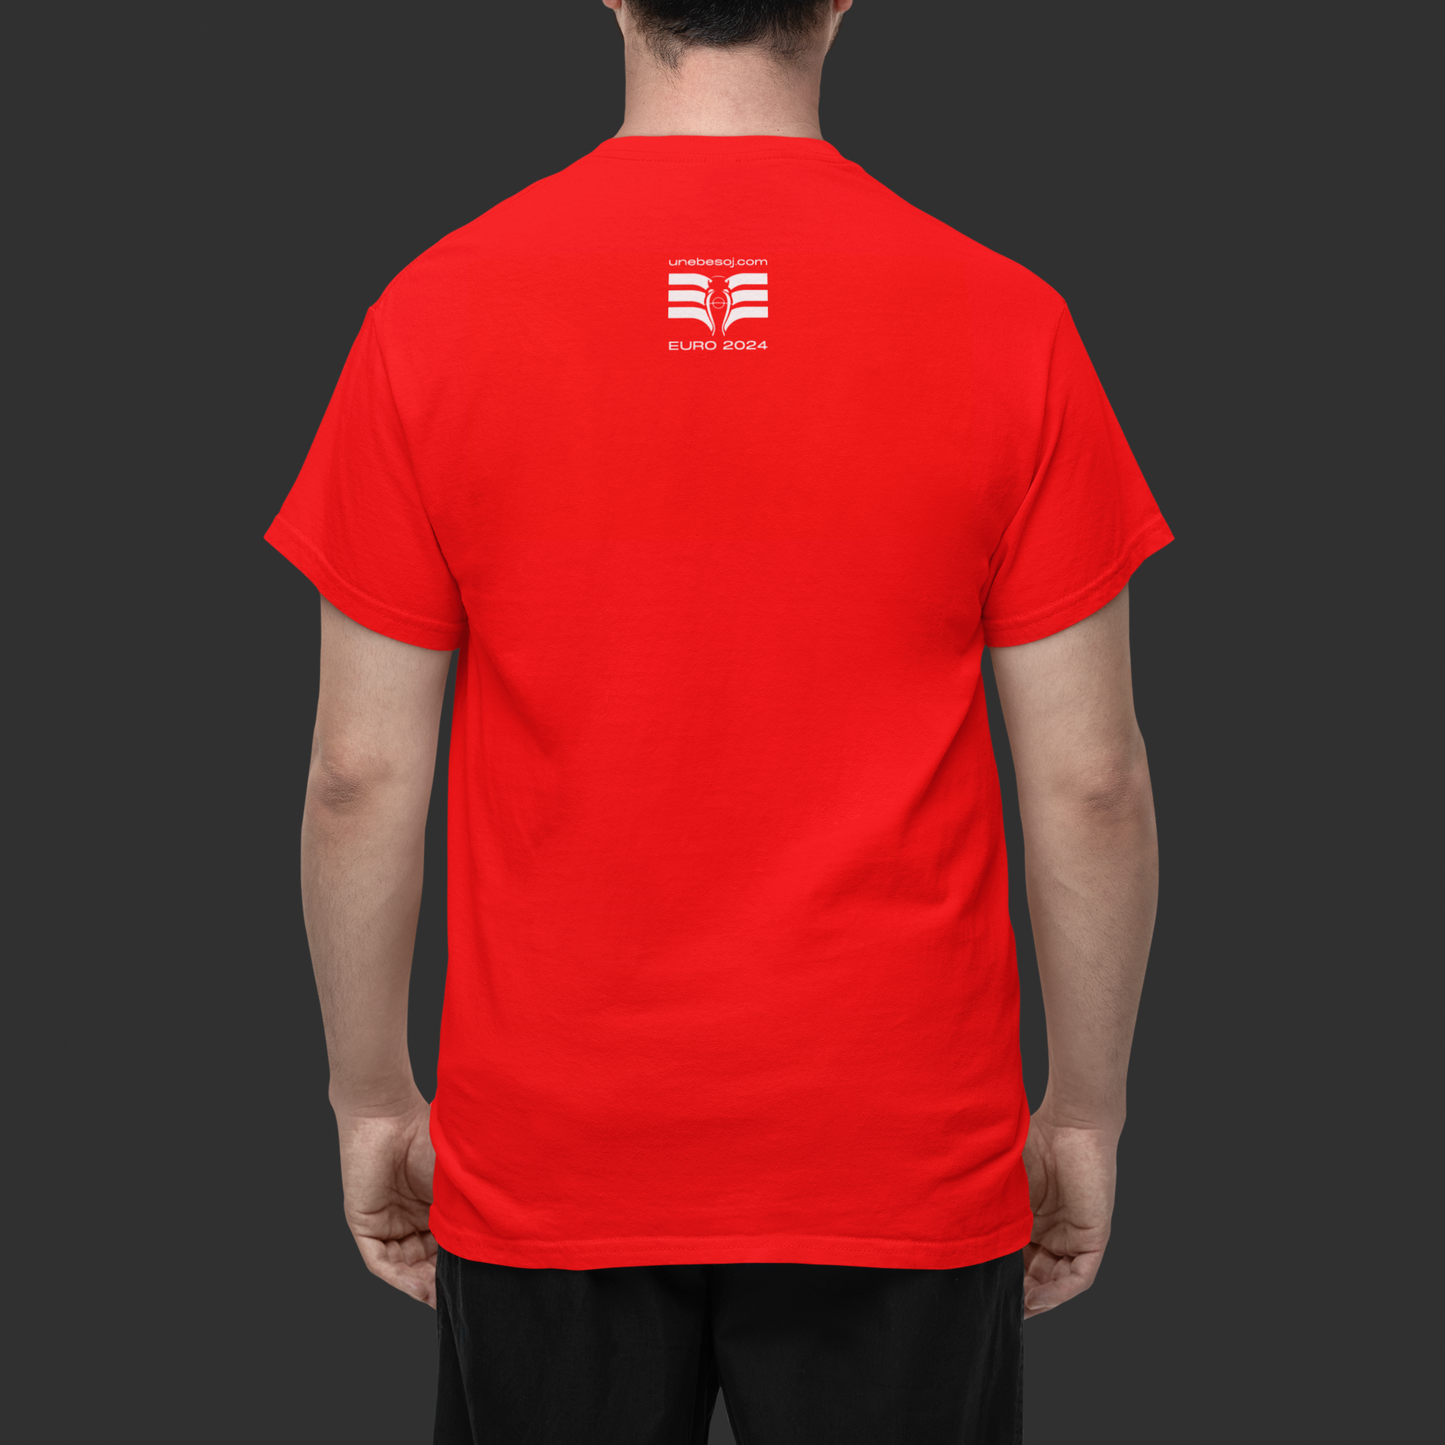 RED T-SHIRT WITH TYPOGRAPHY - EAGLE ON THE BACK